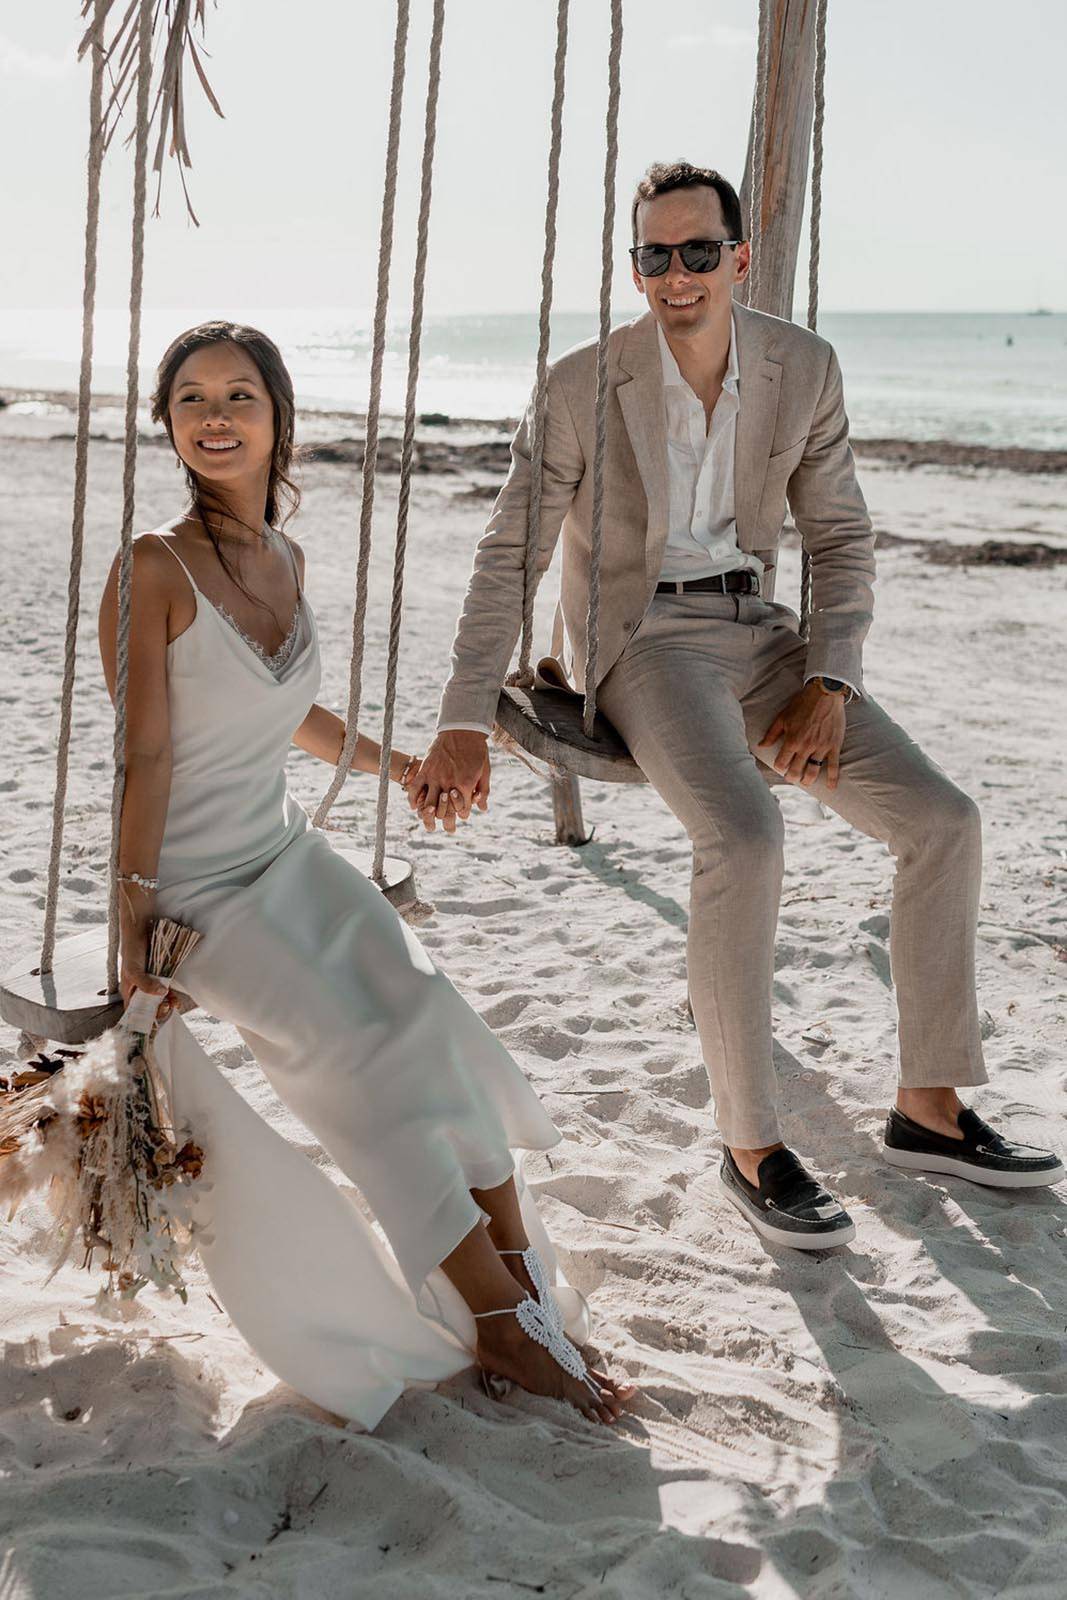 Bride and groom, sitting on a beach swing